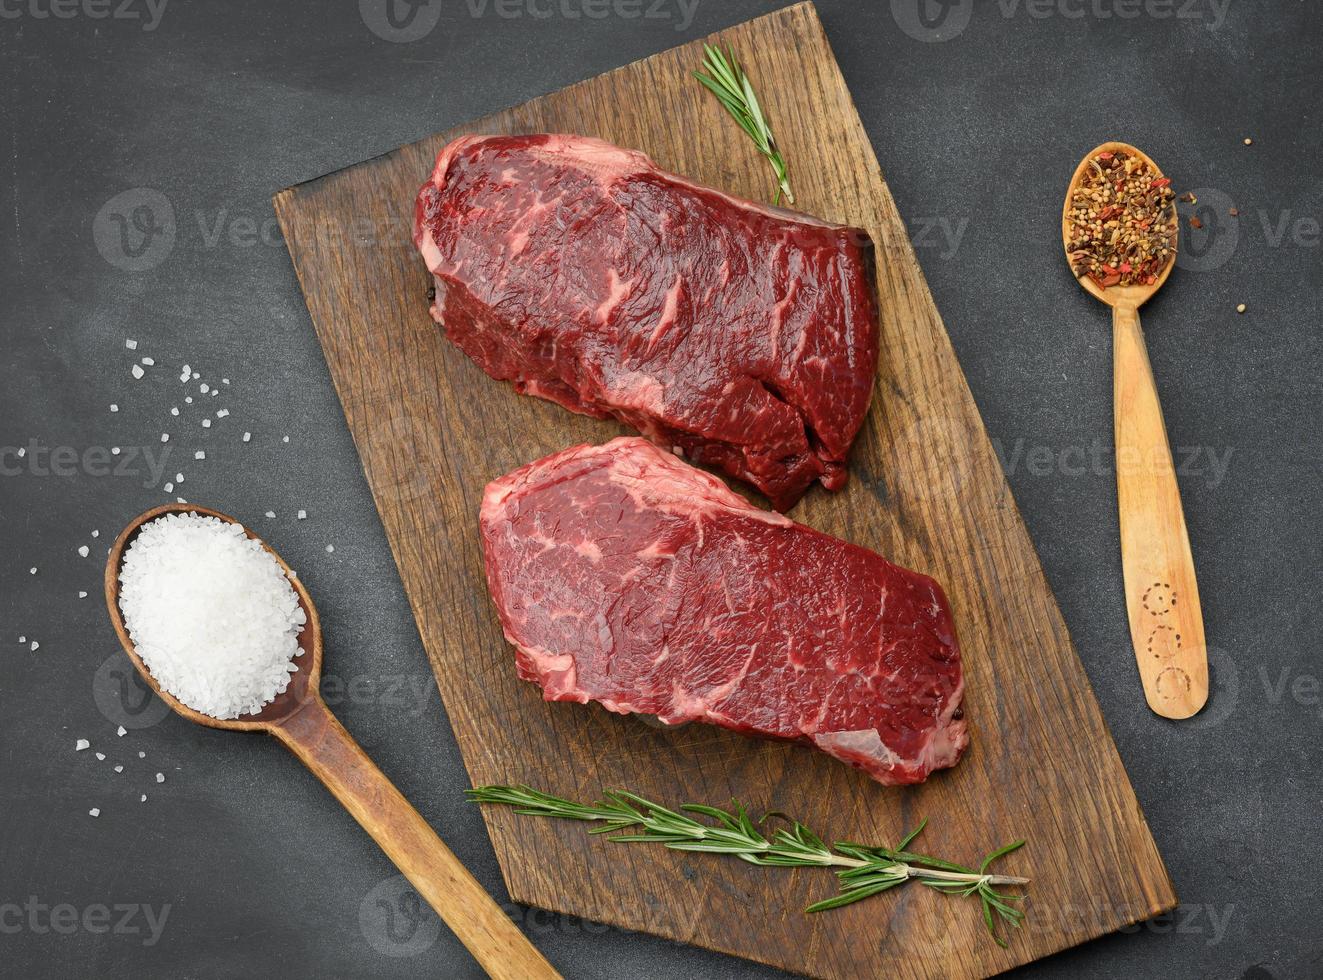 two raw pieces of classic beef steak lie on a wooden board, black table photo